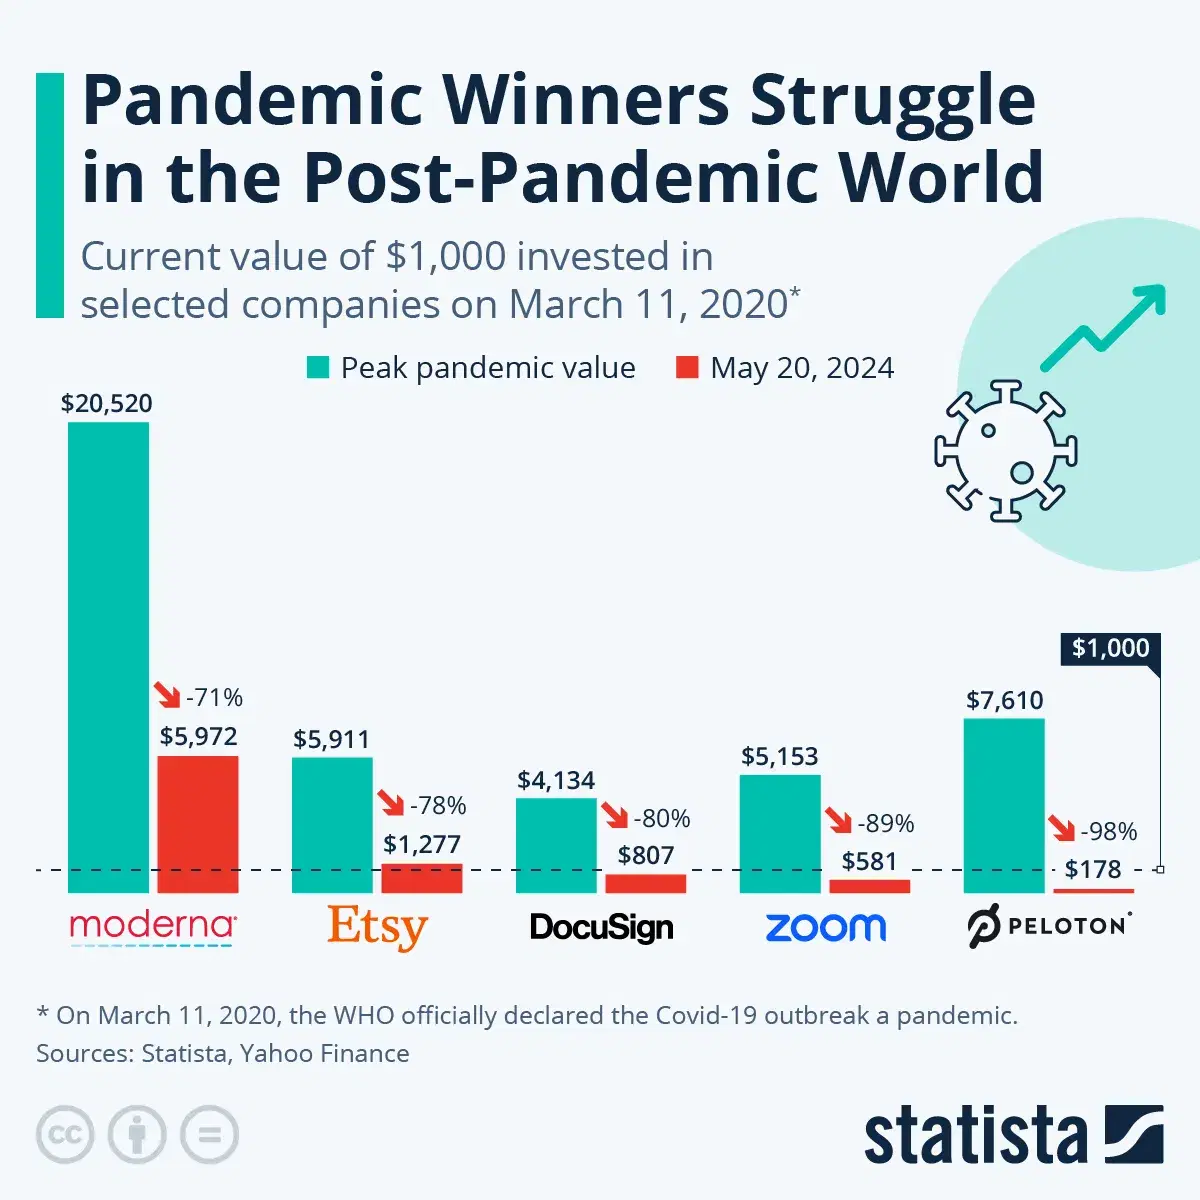 Pandemic Winners Struggle in the Post-Pandemic World